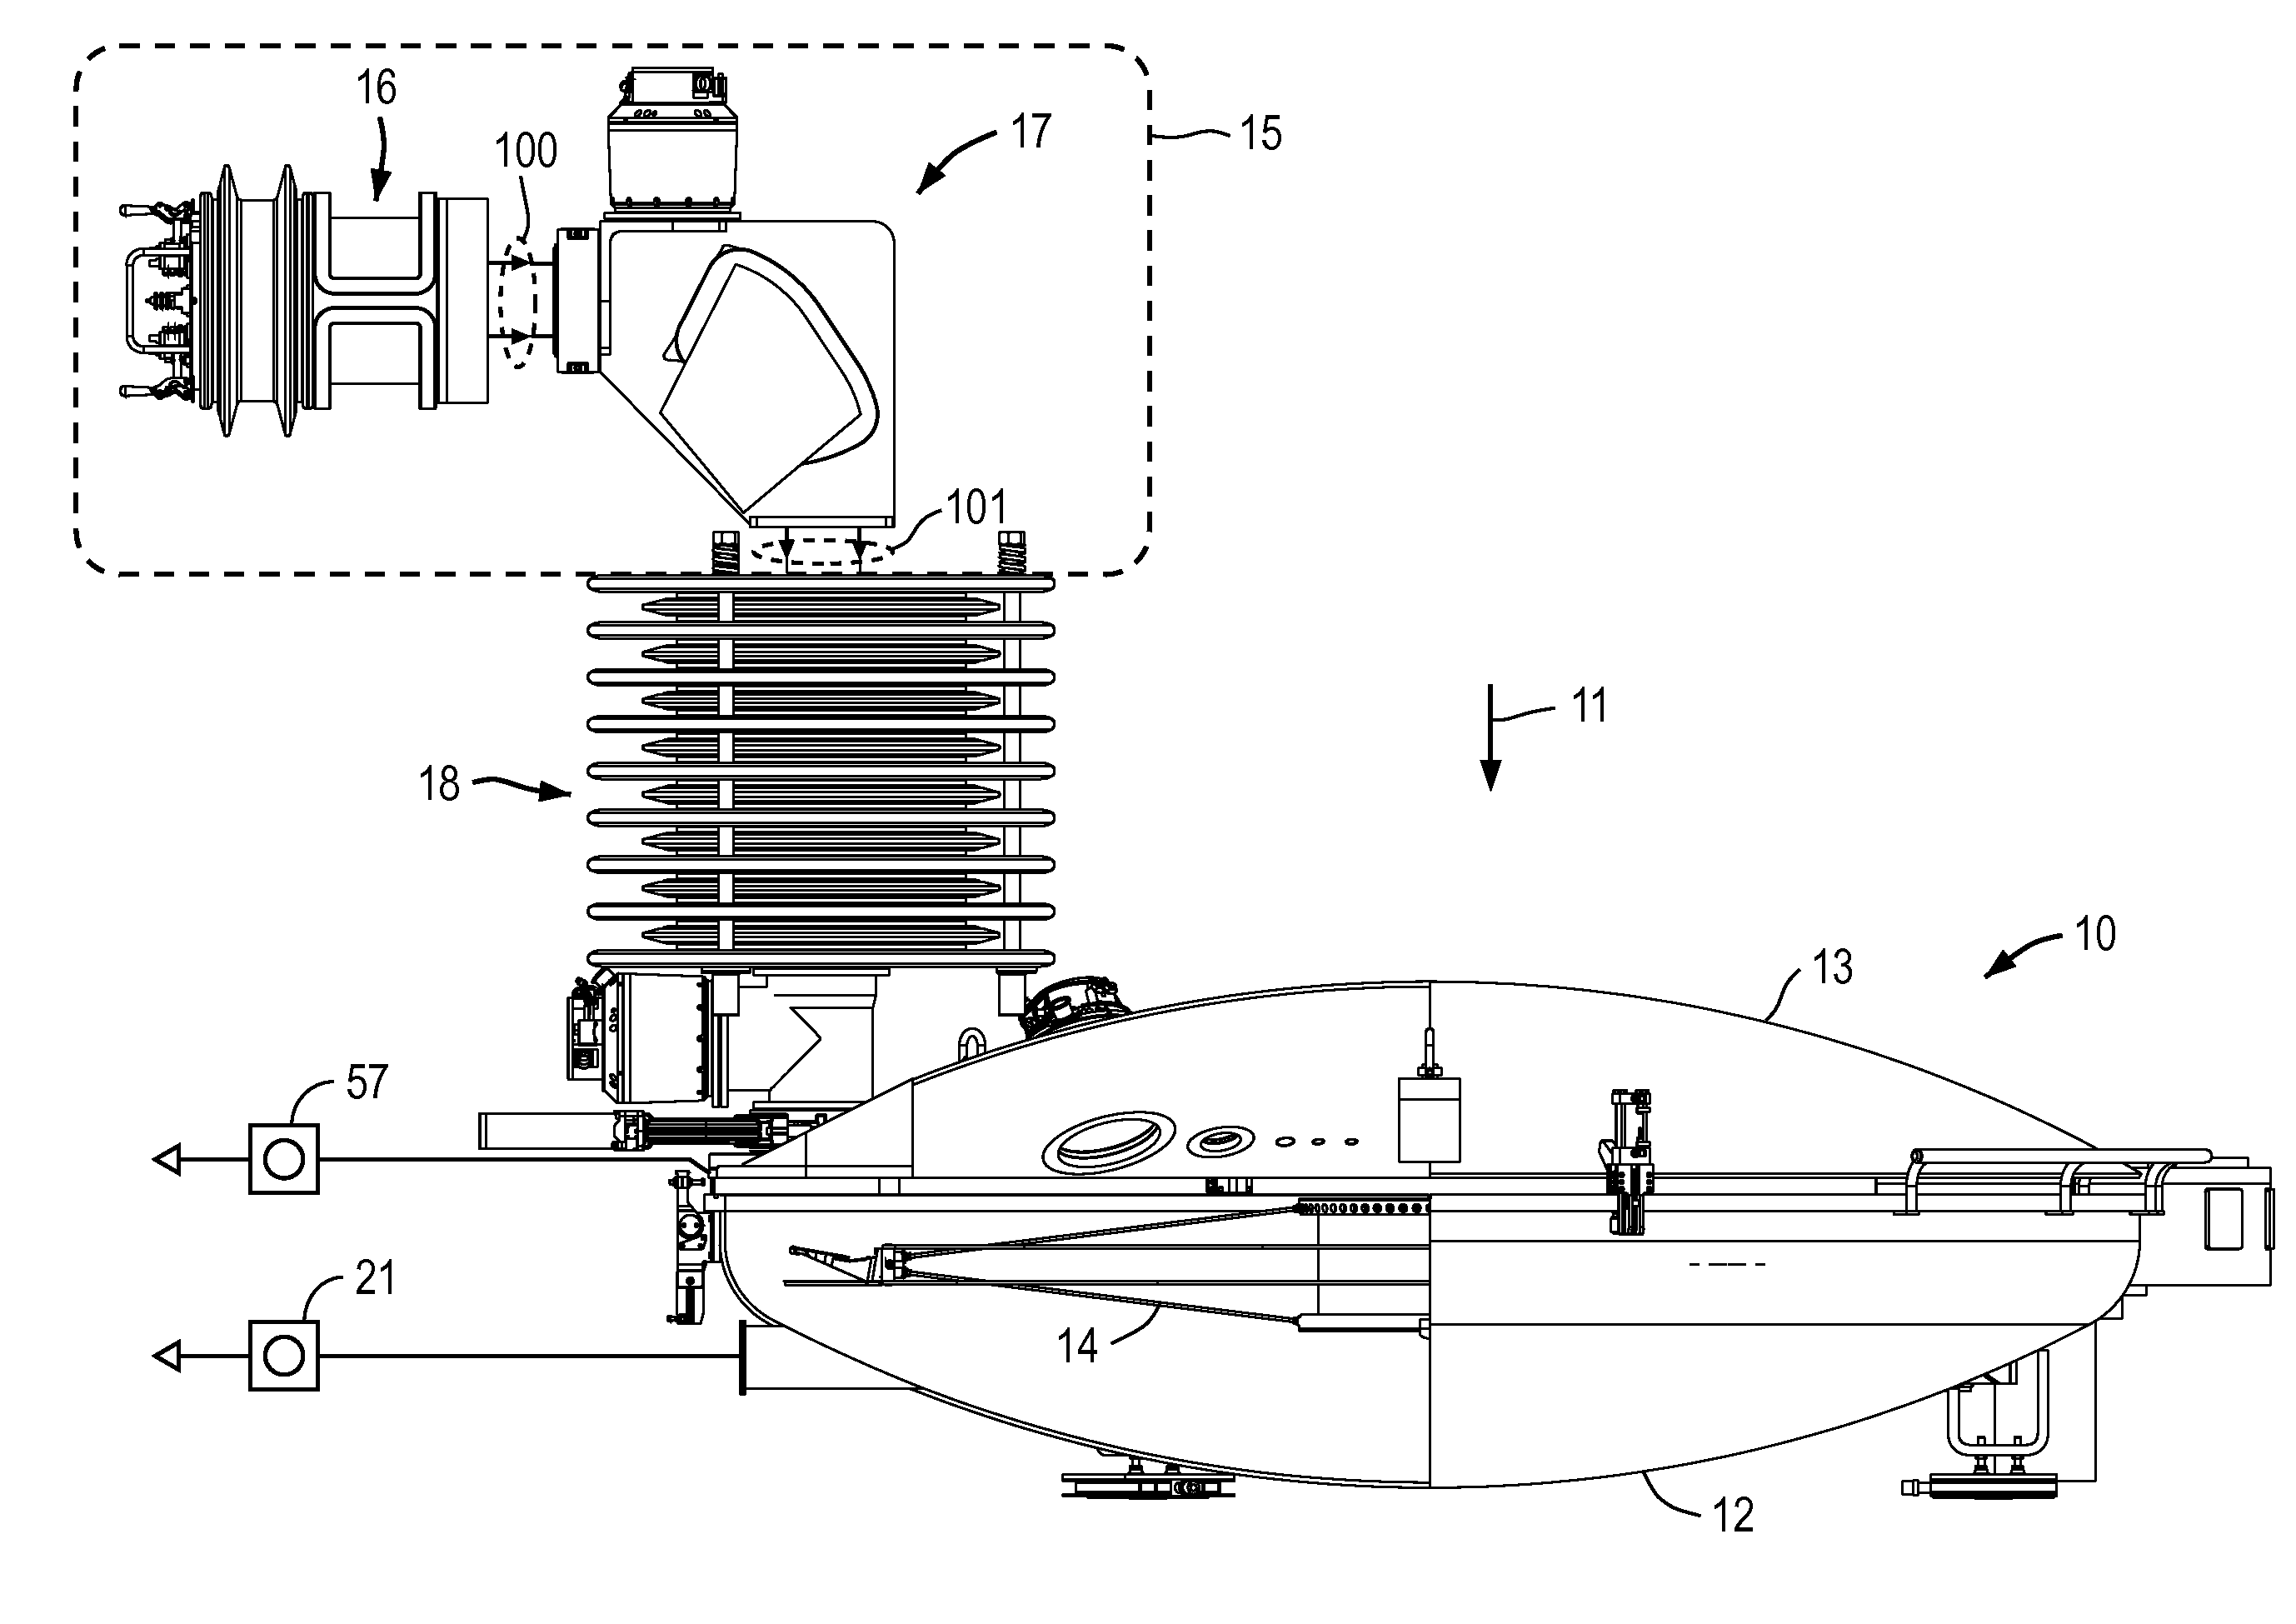 Ion source assembly for ion implantation apparatus and a method of generating ions therein